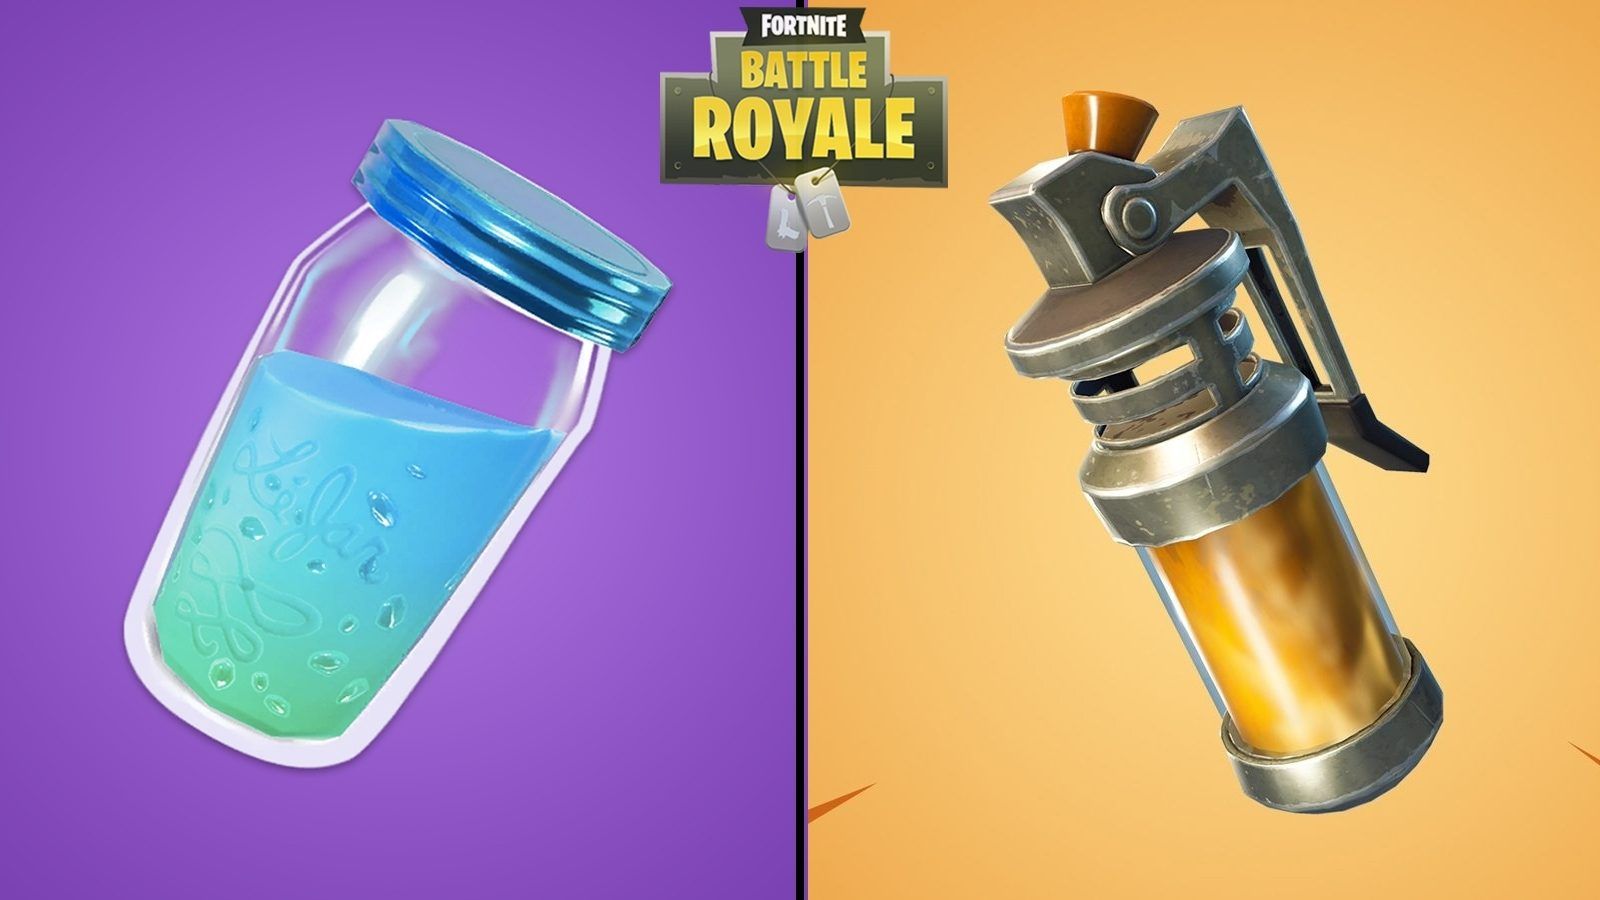 Slurp Grenade Concept Puts a Clever Spin on the New Stink Bomb Model in Fortnite